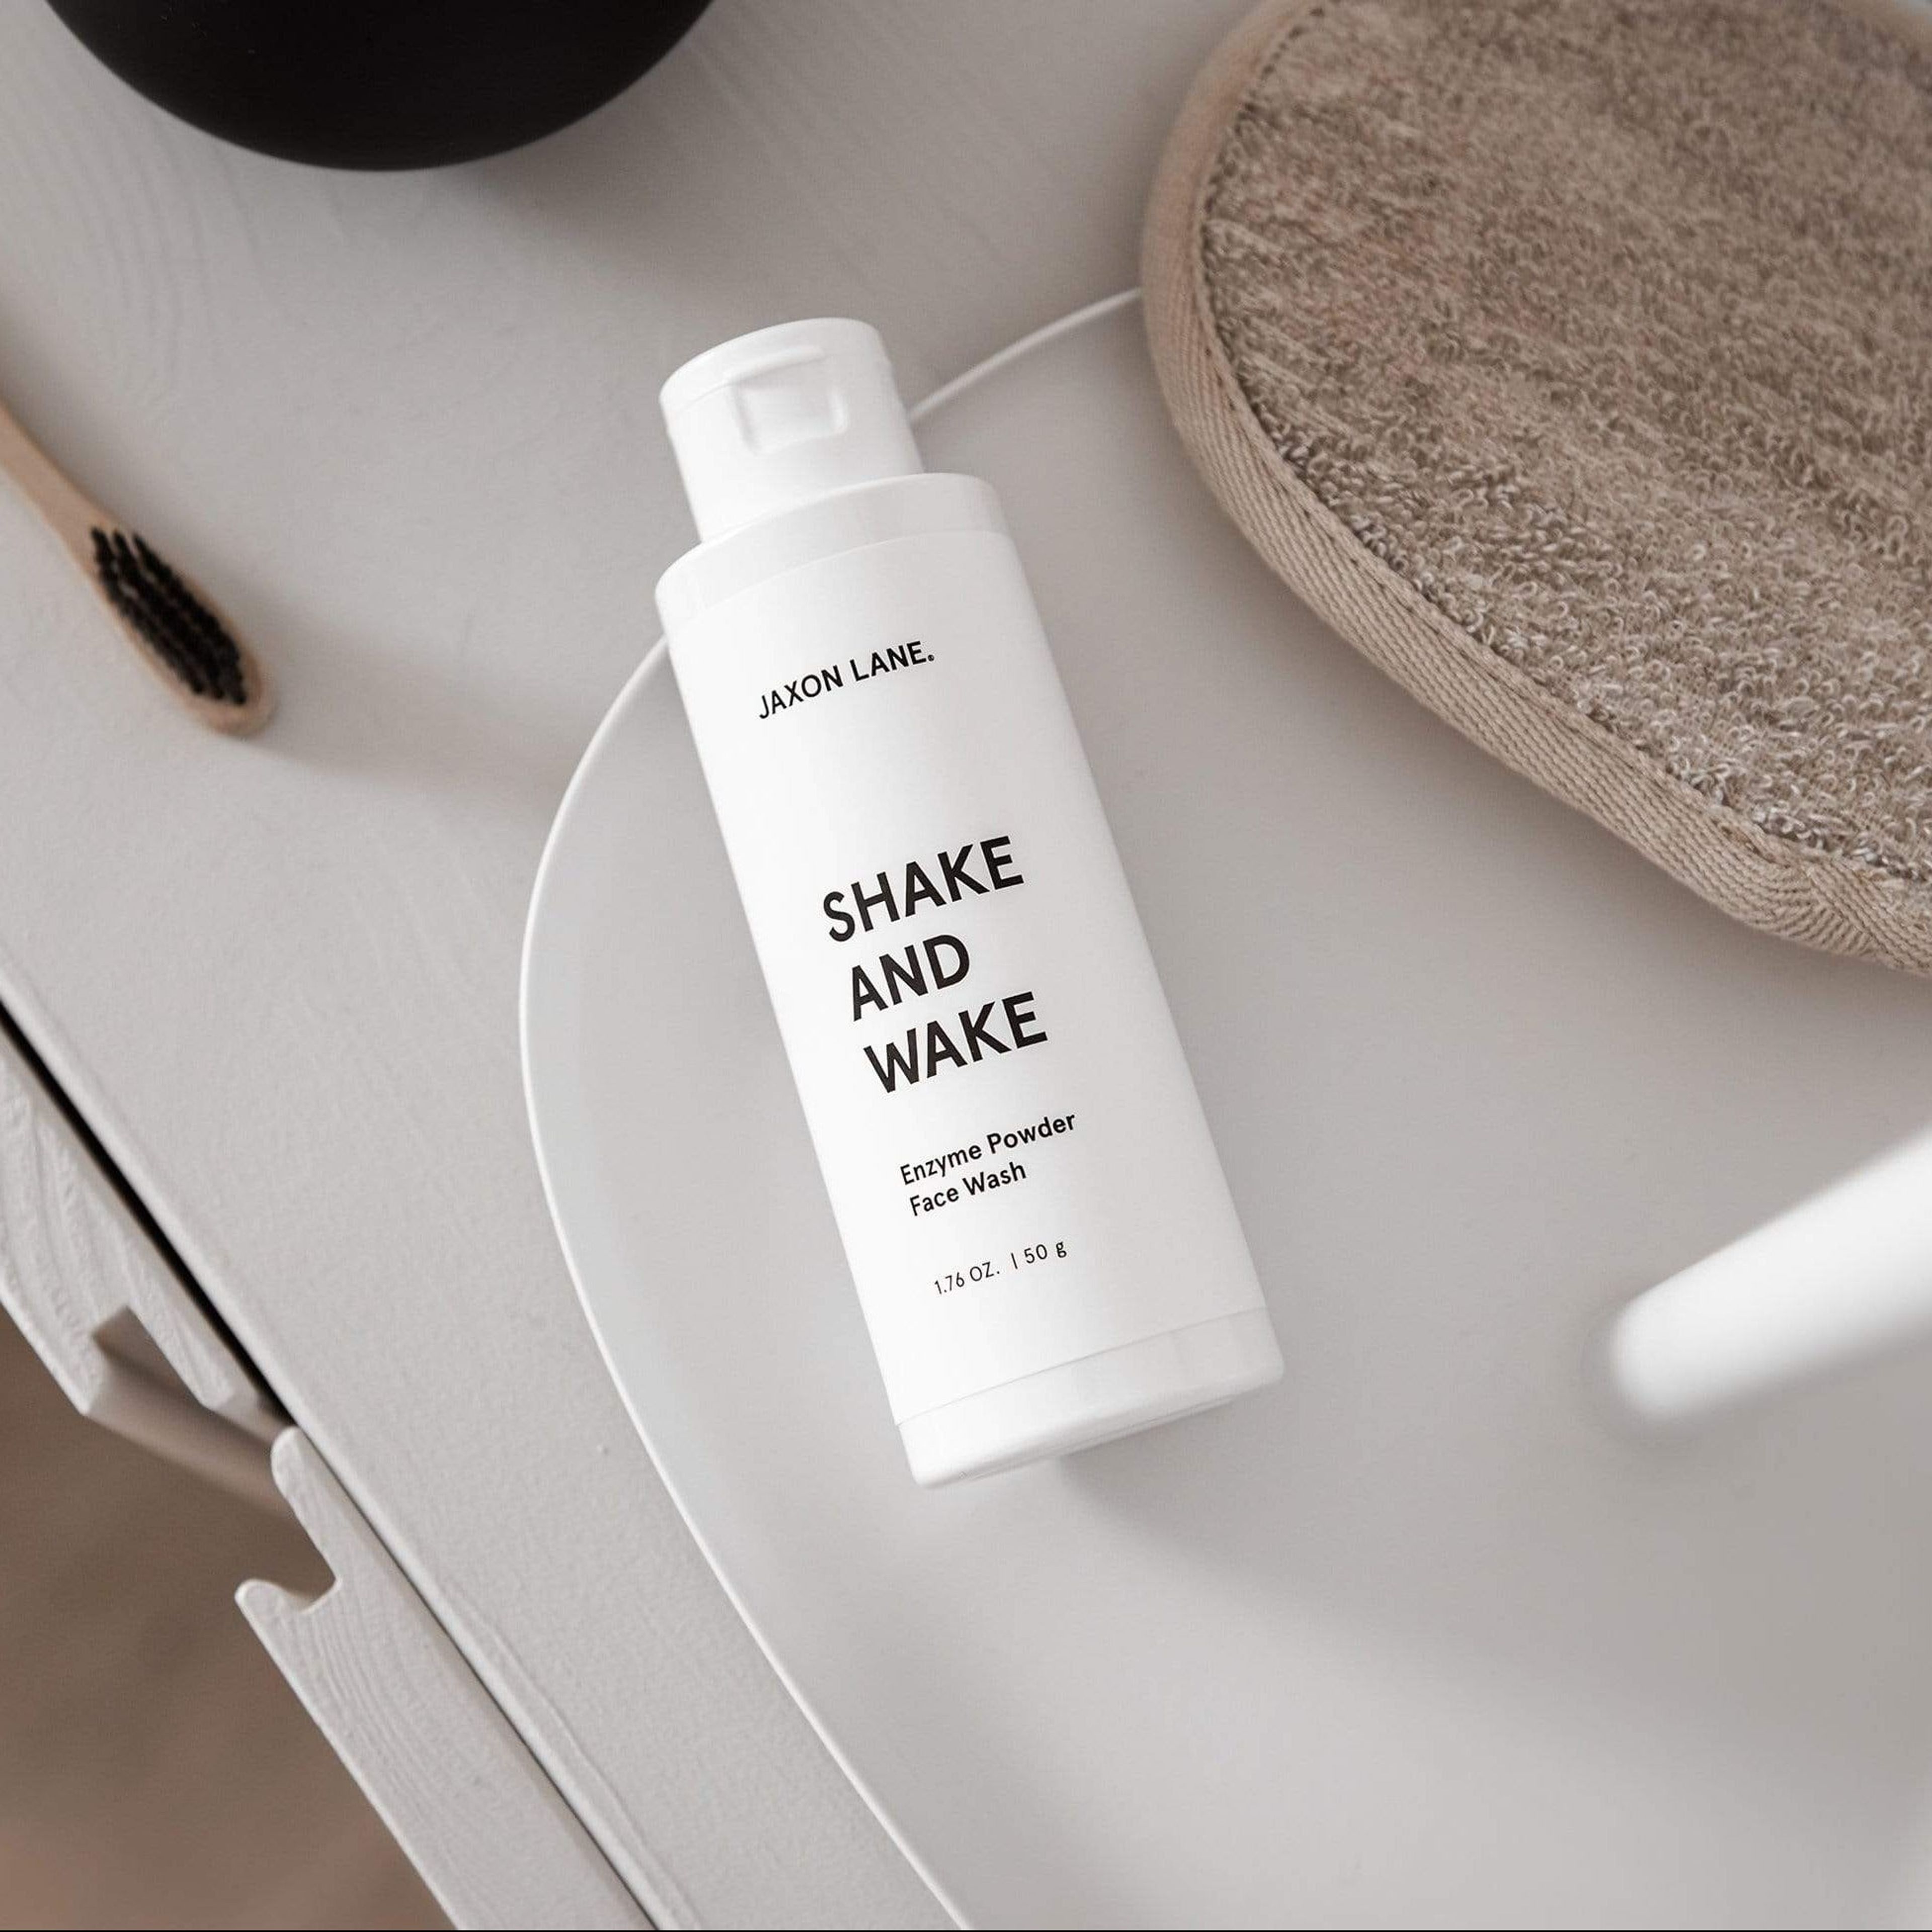 Shake And Wake - Exfoliating Enzyme Powder Cleanser